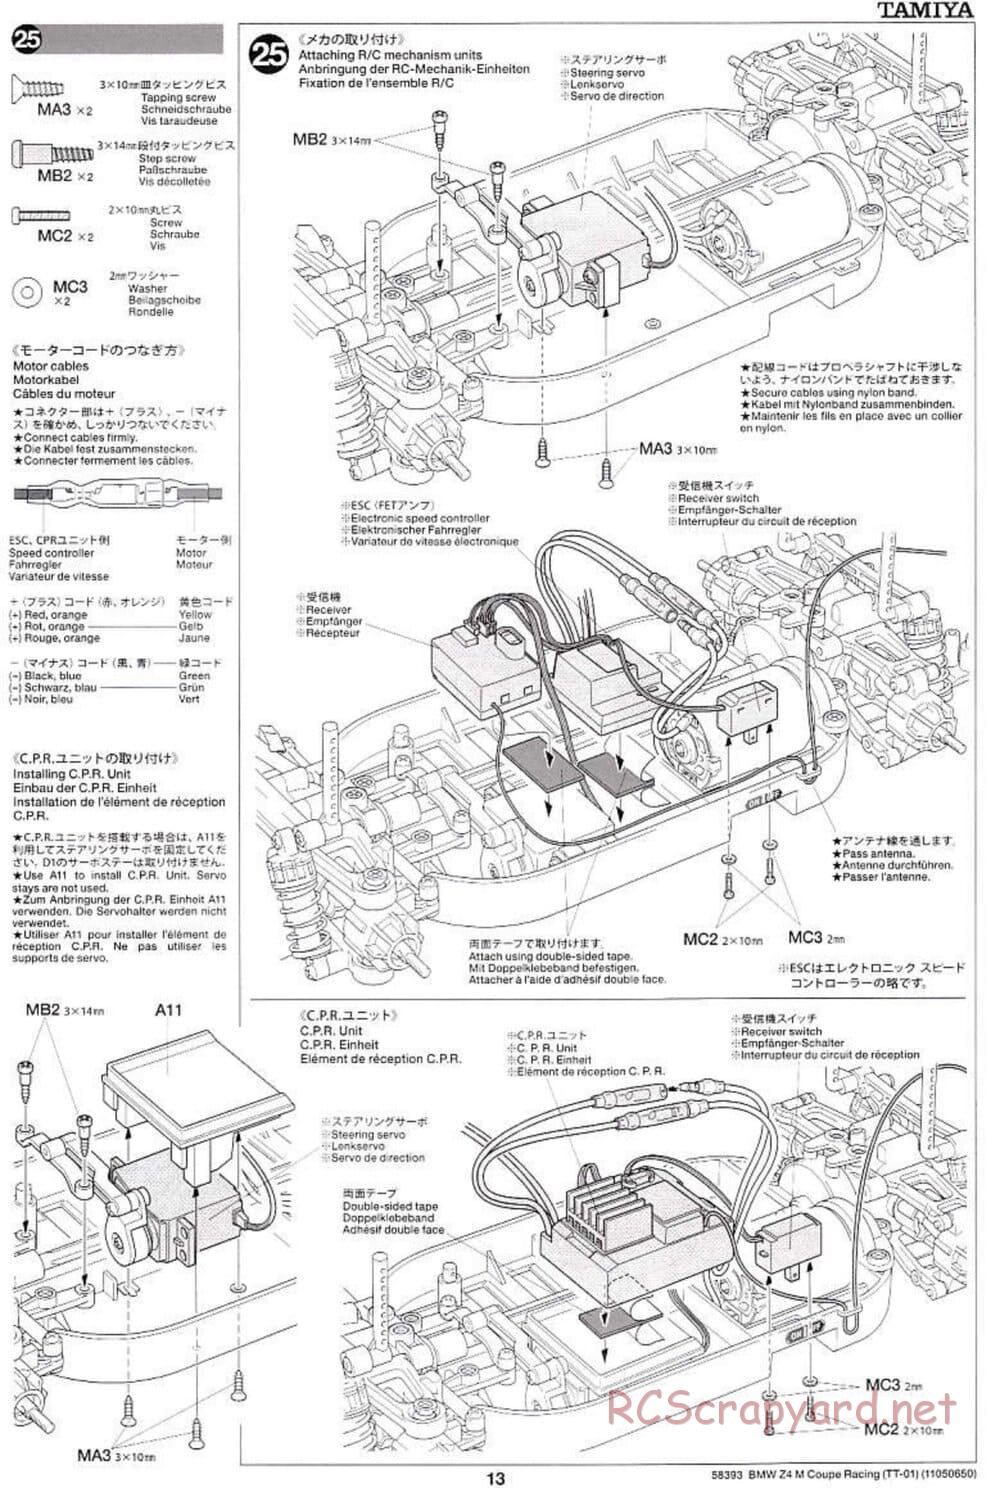 Tamiya - BMW Z4 M Coupe Racing - TT-01 Chassis - Manual - Page 13